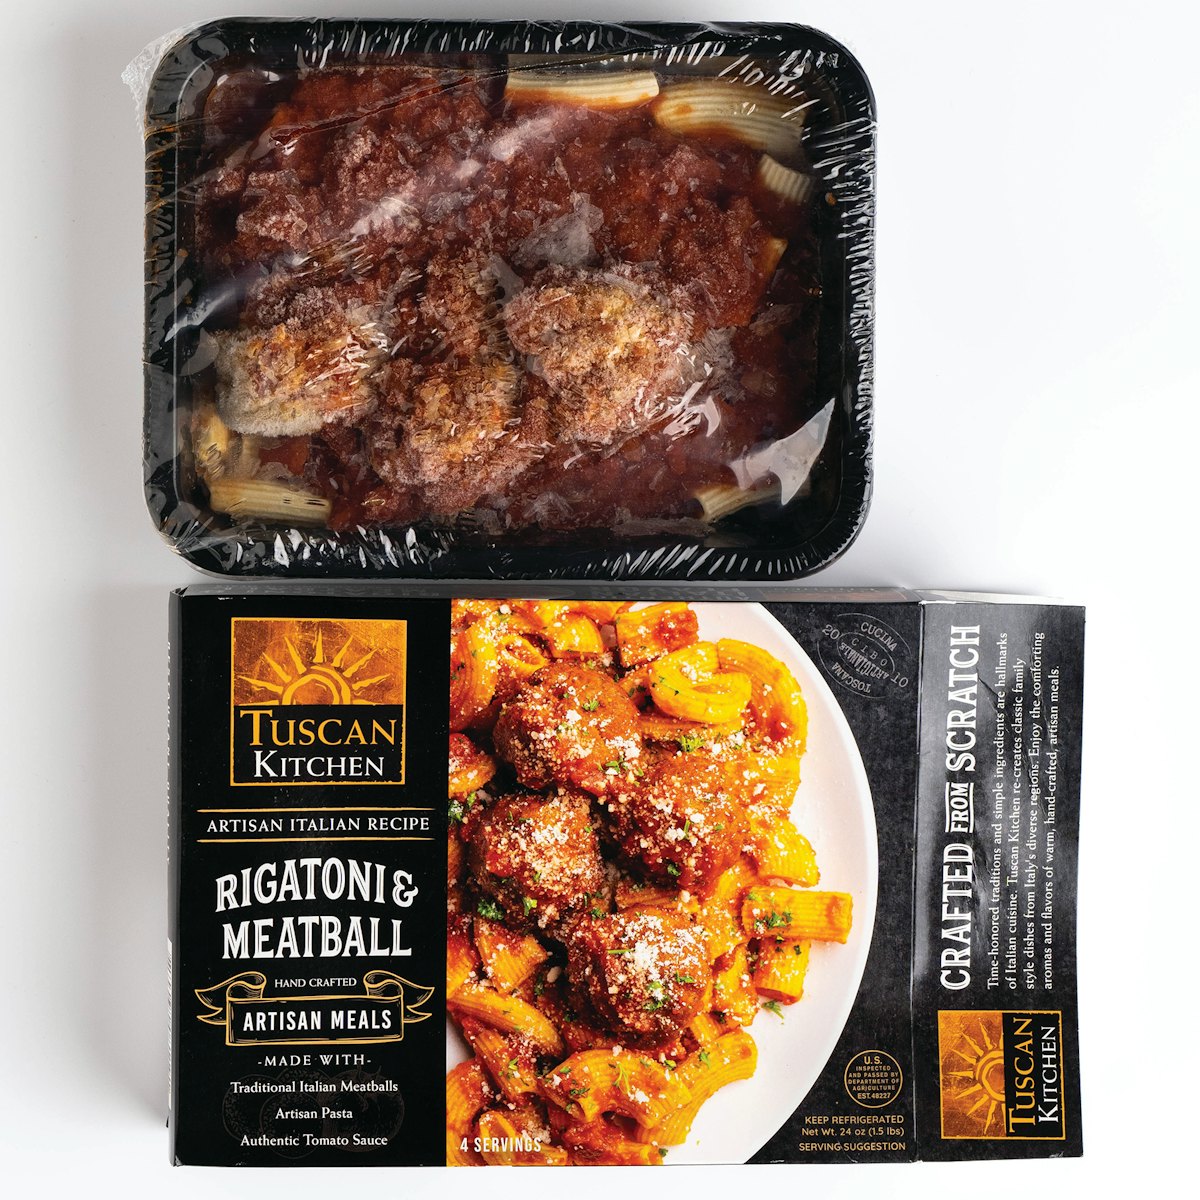 Meat packaging trends, flexible solutions